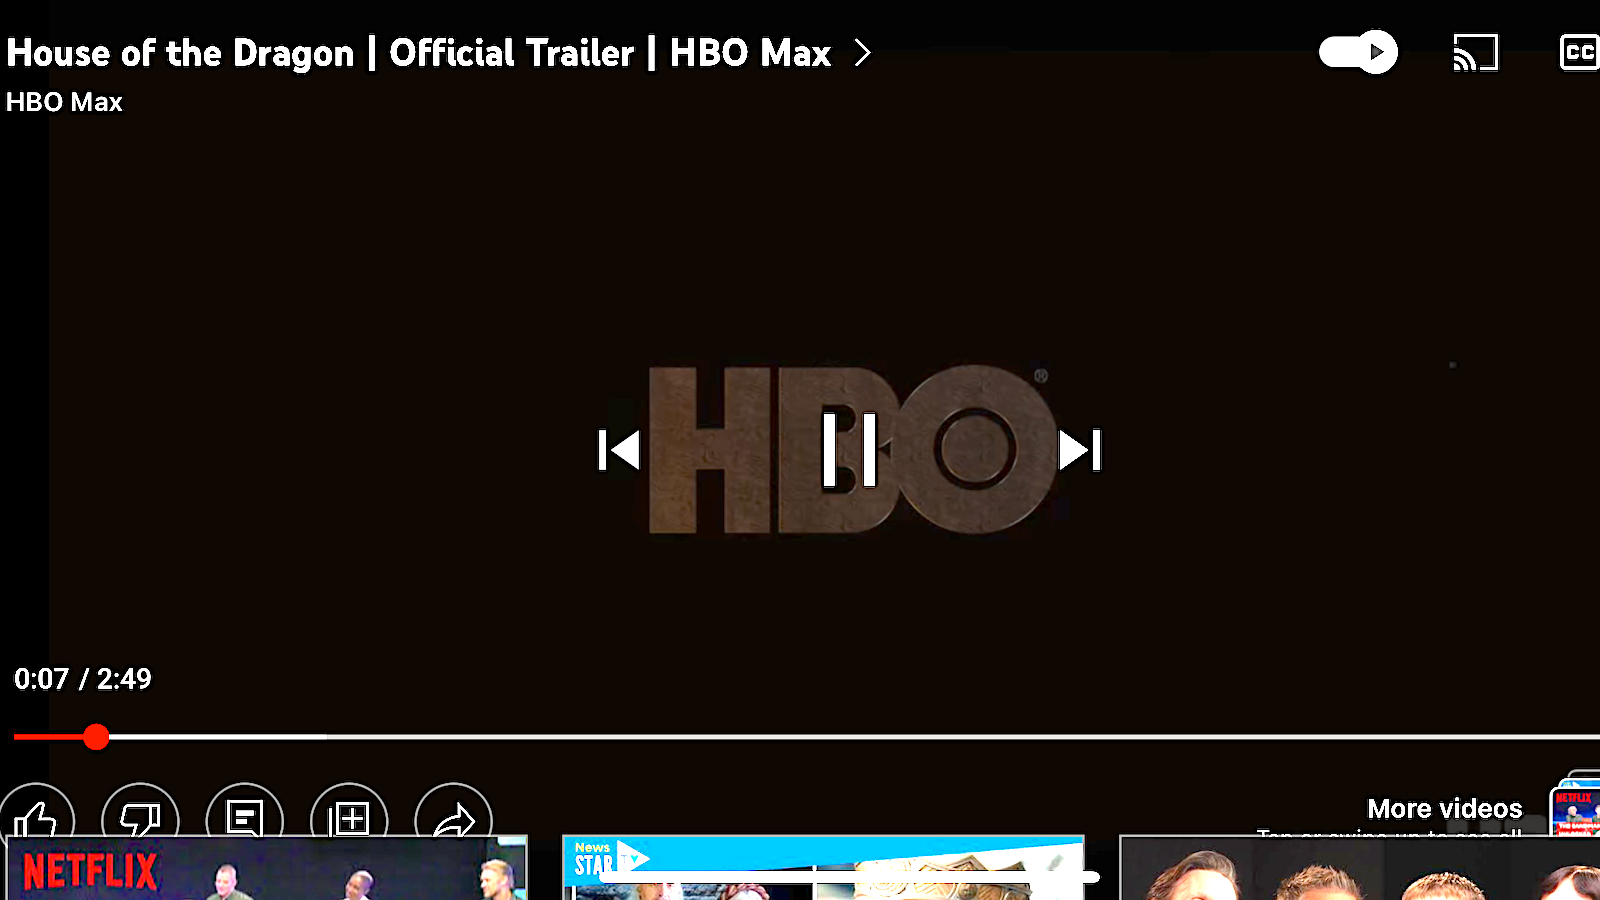 A screenshot of the HBO logo that precedes House of the Dragon on YouTube